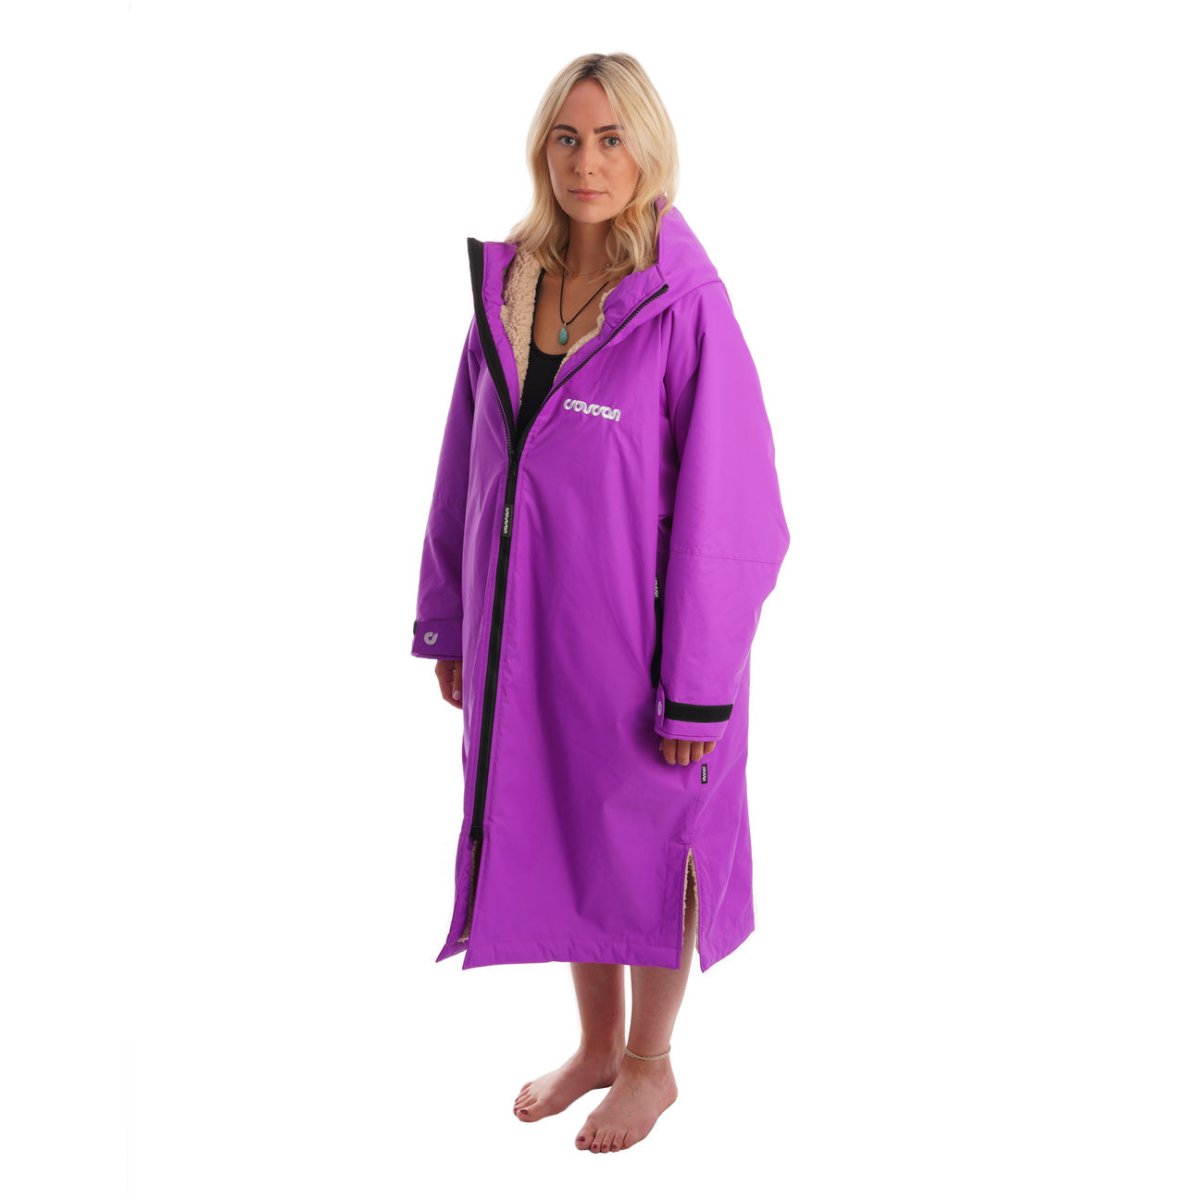 COUCON CHANGING ROBE ADULT LONG SLEEVE - MAGENTA PURPLE